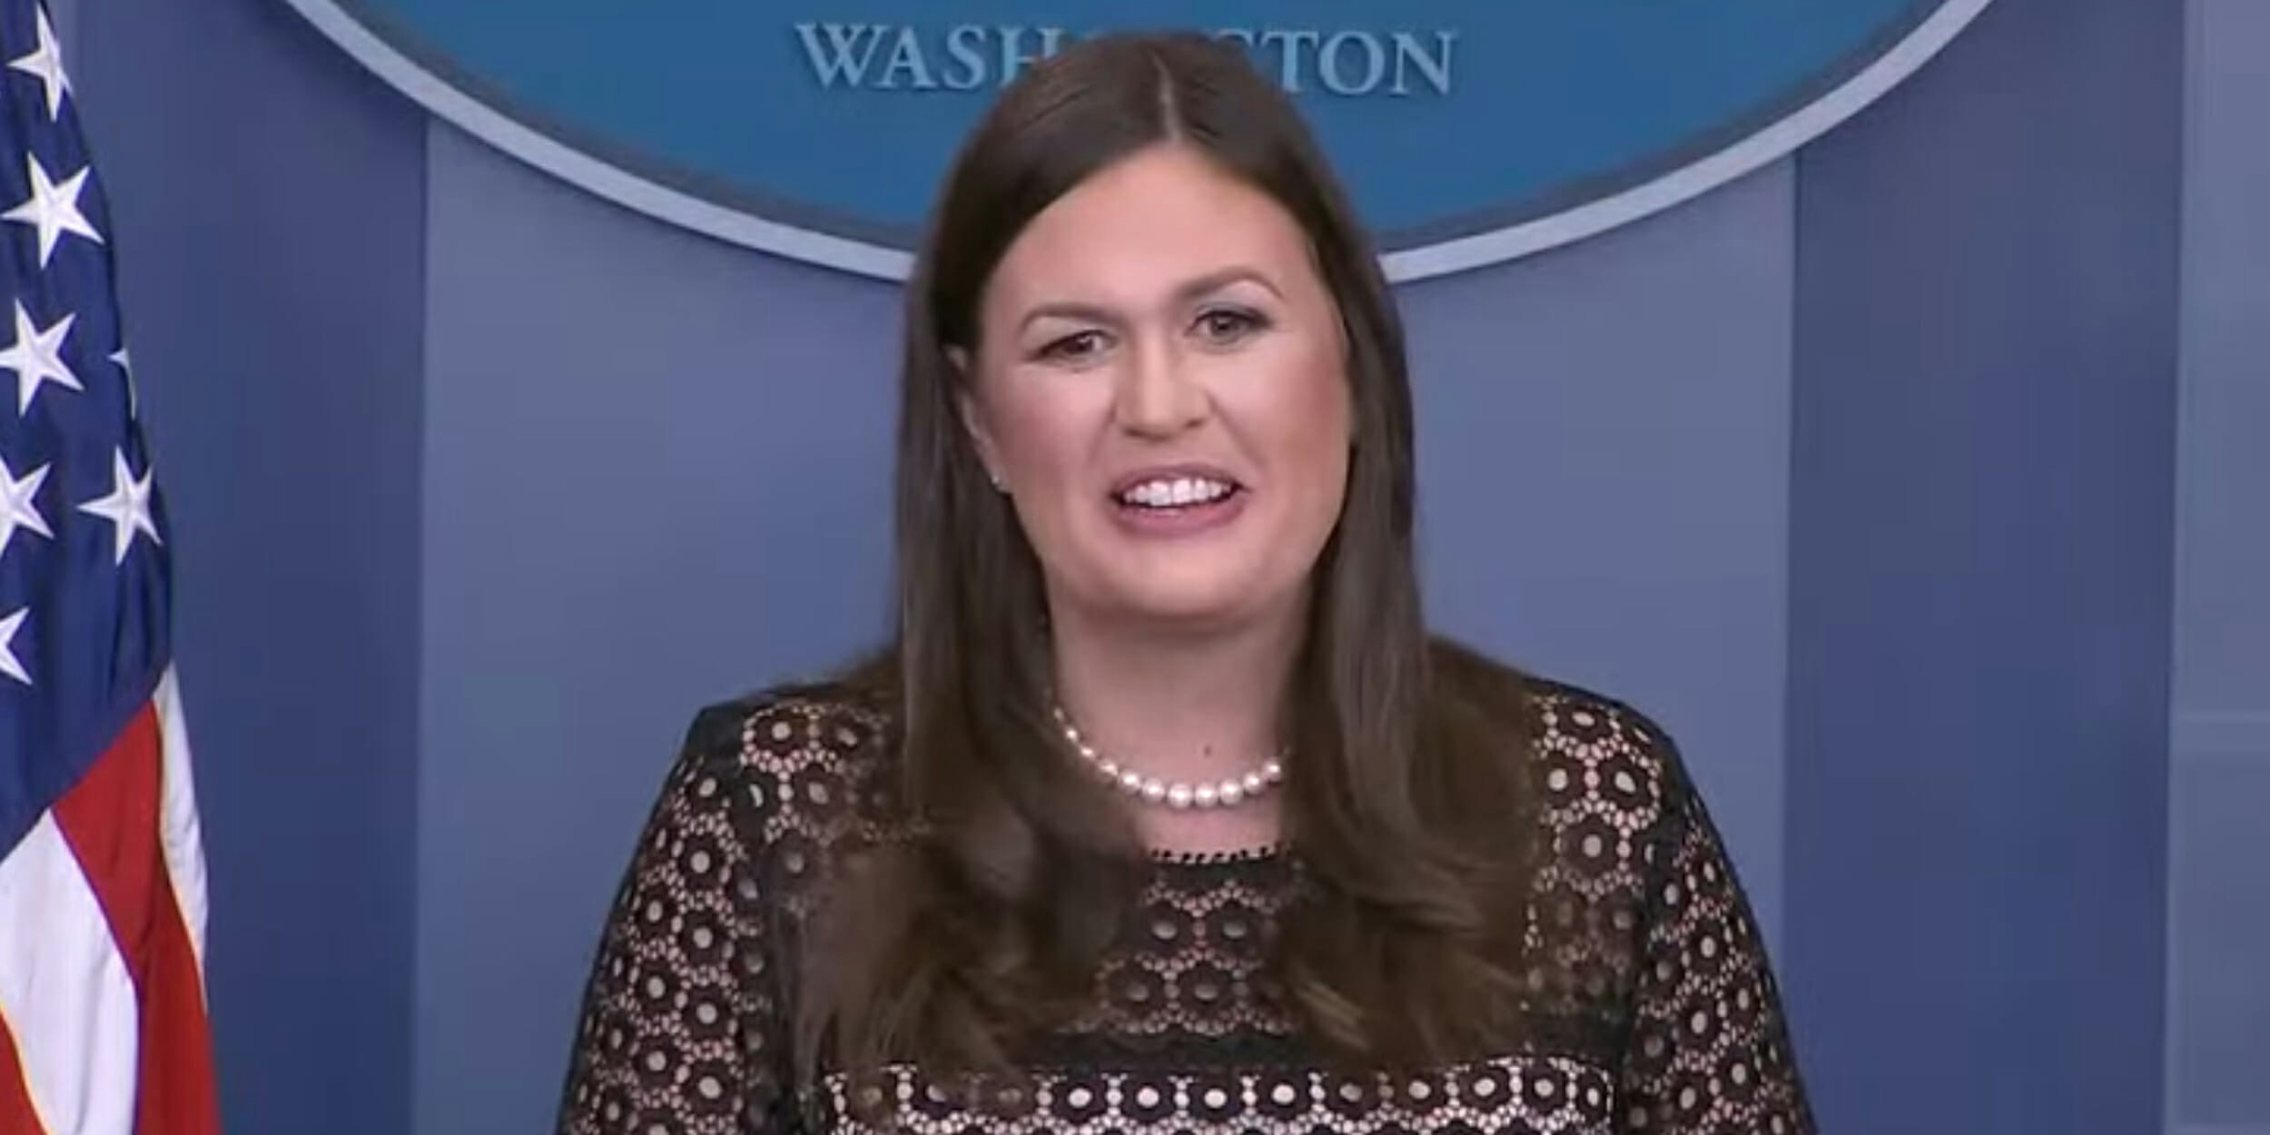 Sarah Huckabee Sanders called the Trump NFL feud 'pretty black and white.' The irony was not lost on people.